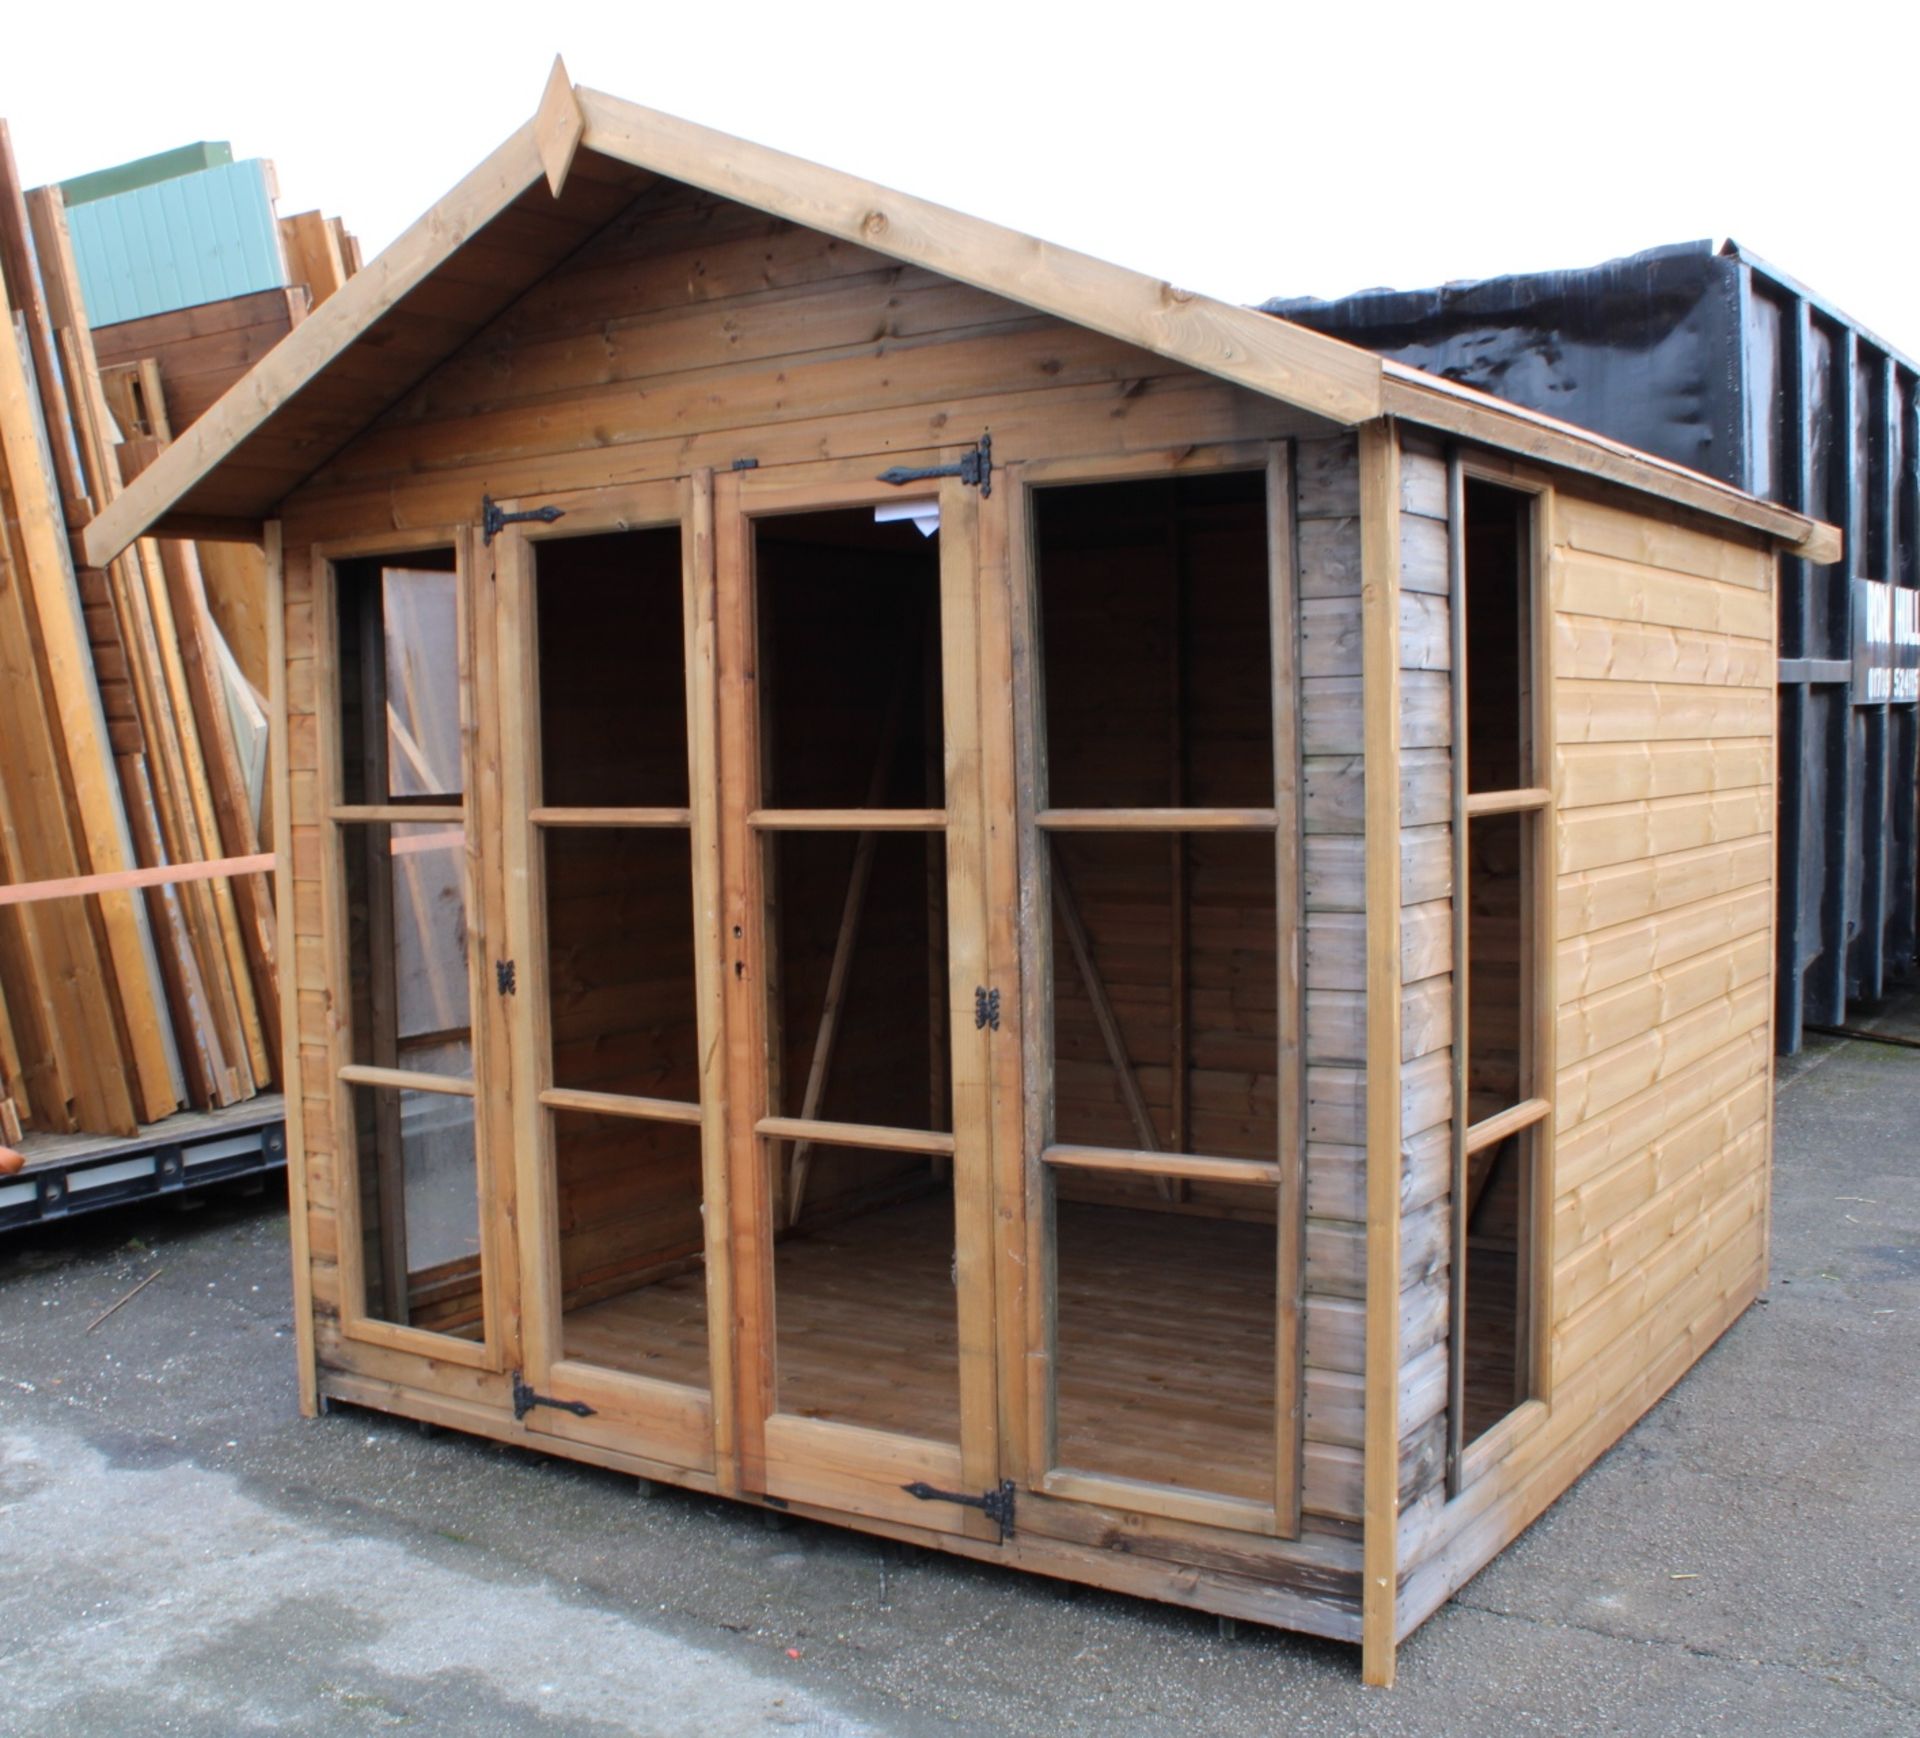 4 9/2 8x8 'ascot' summerhouse shed, Standard 16mm Nominal Cladding - Image 2 of 3